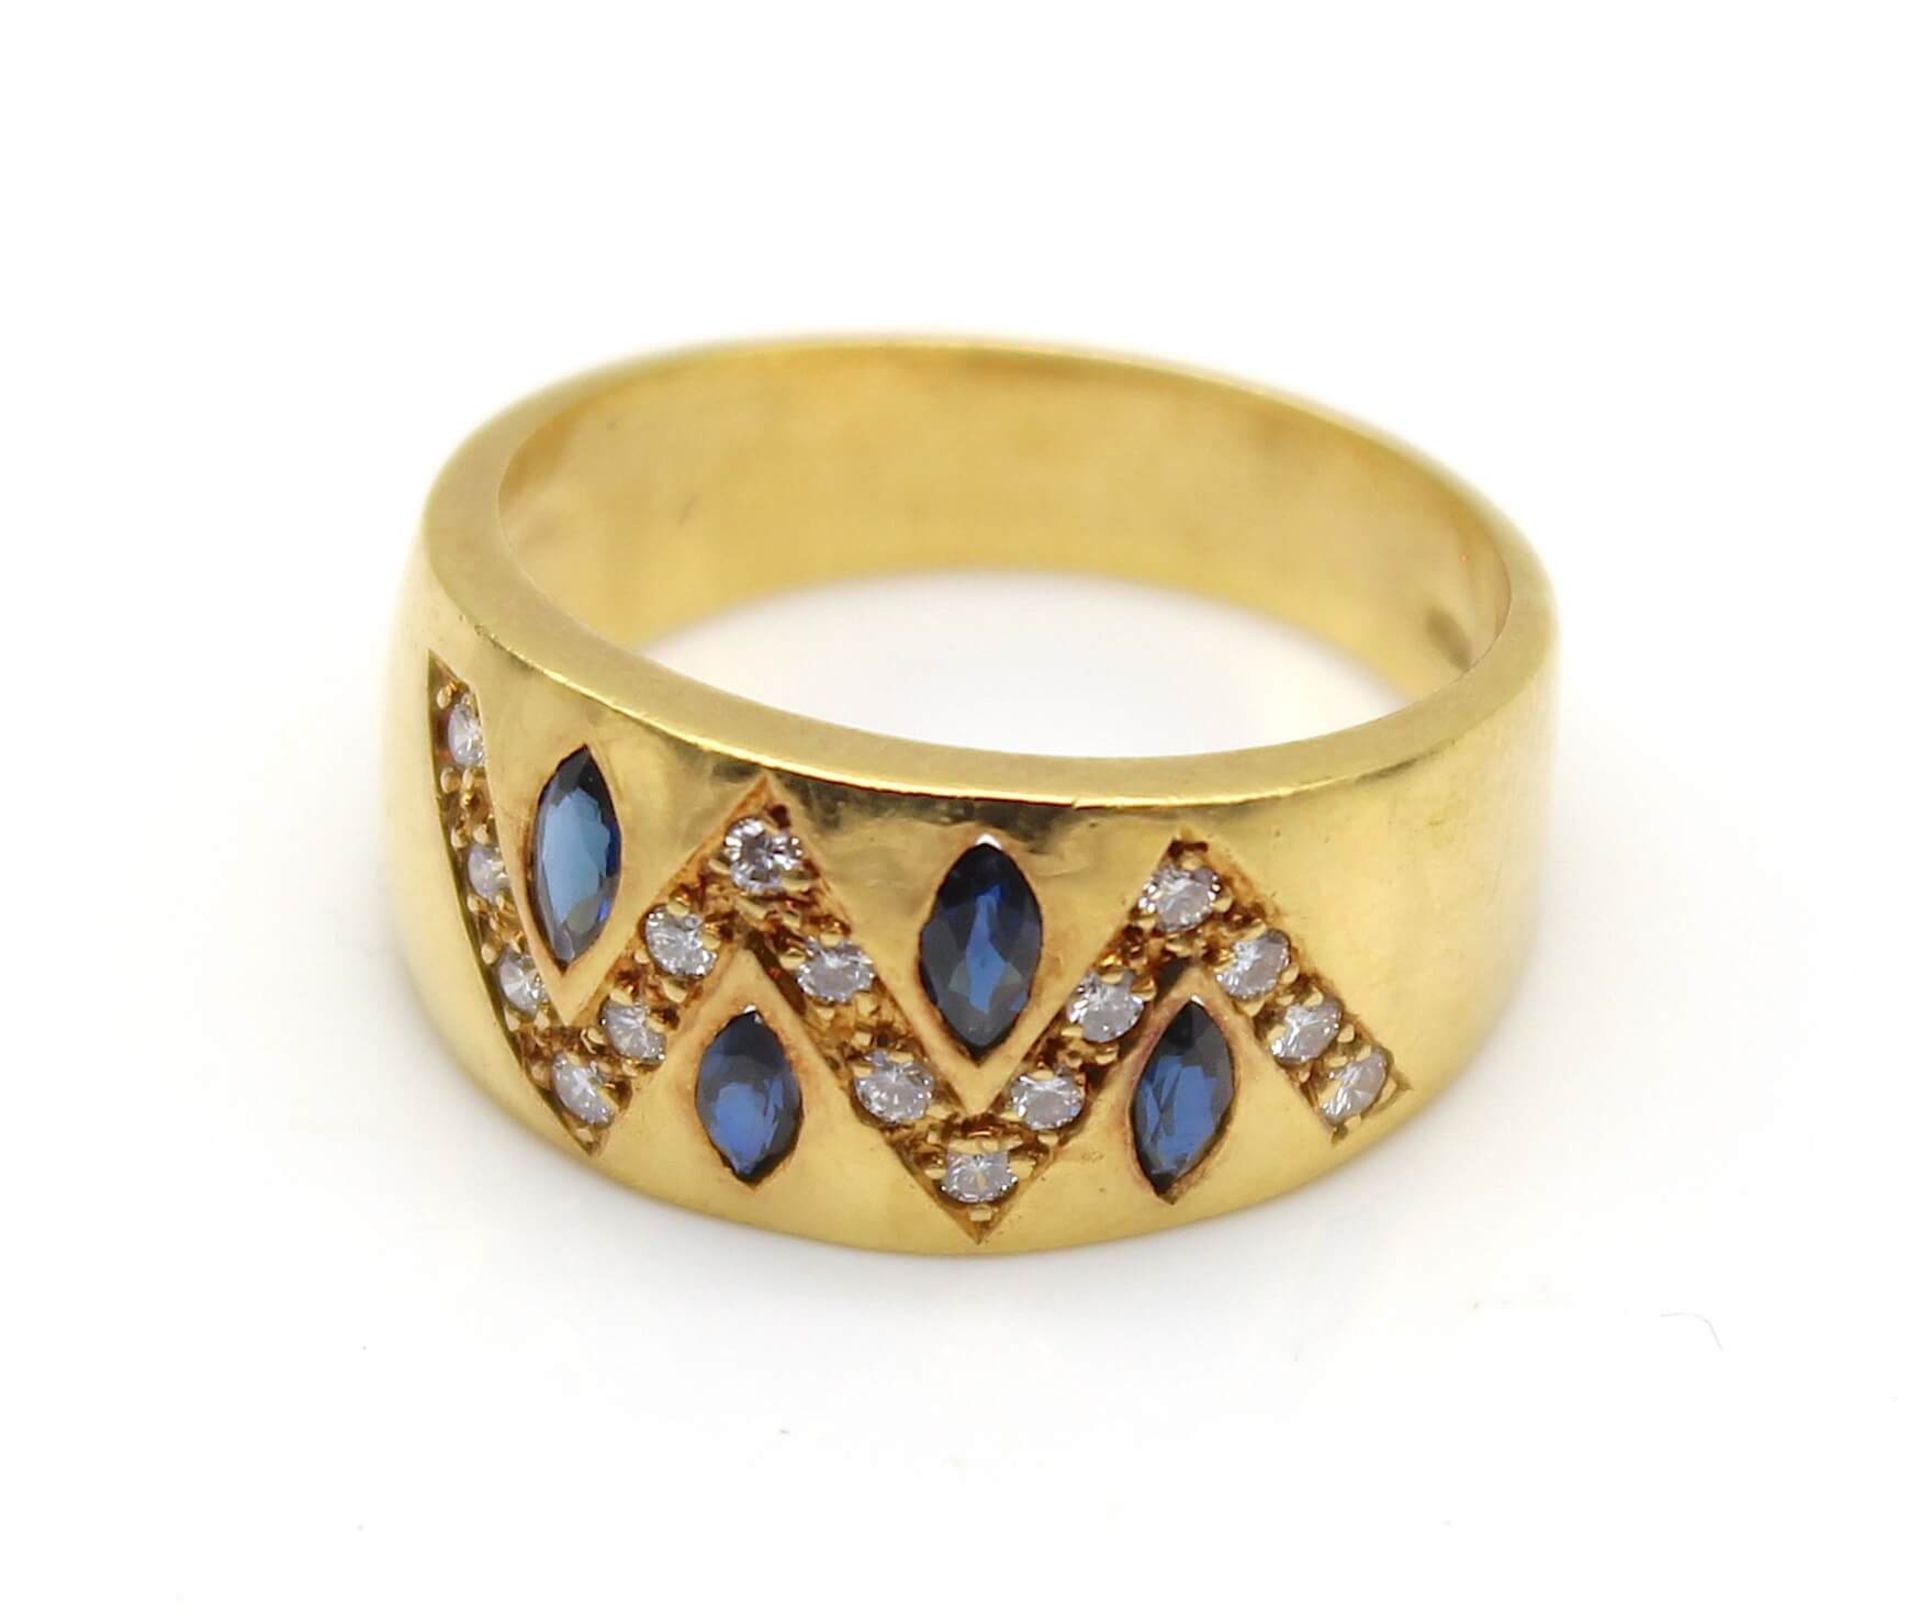 Ring in 750 gold with sapphires and brilliants - Image 2 of 3